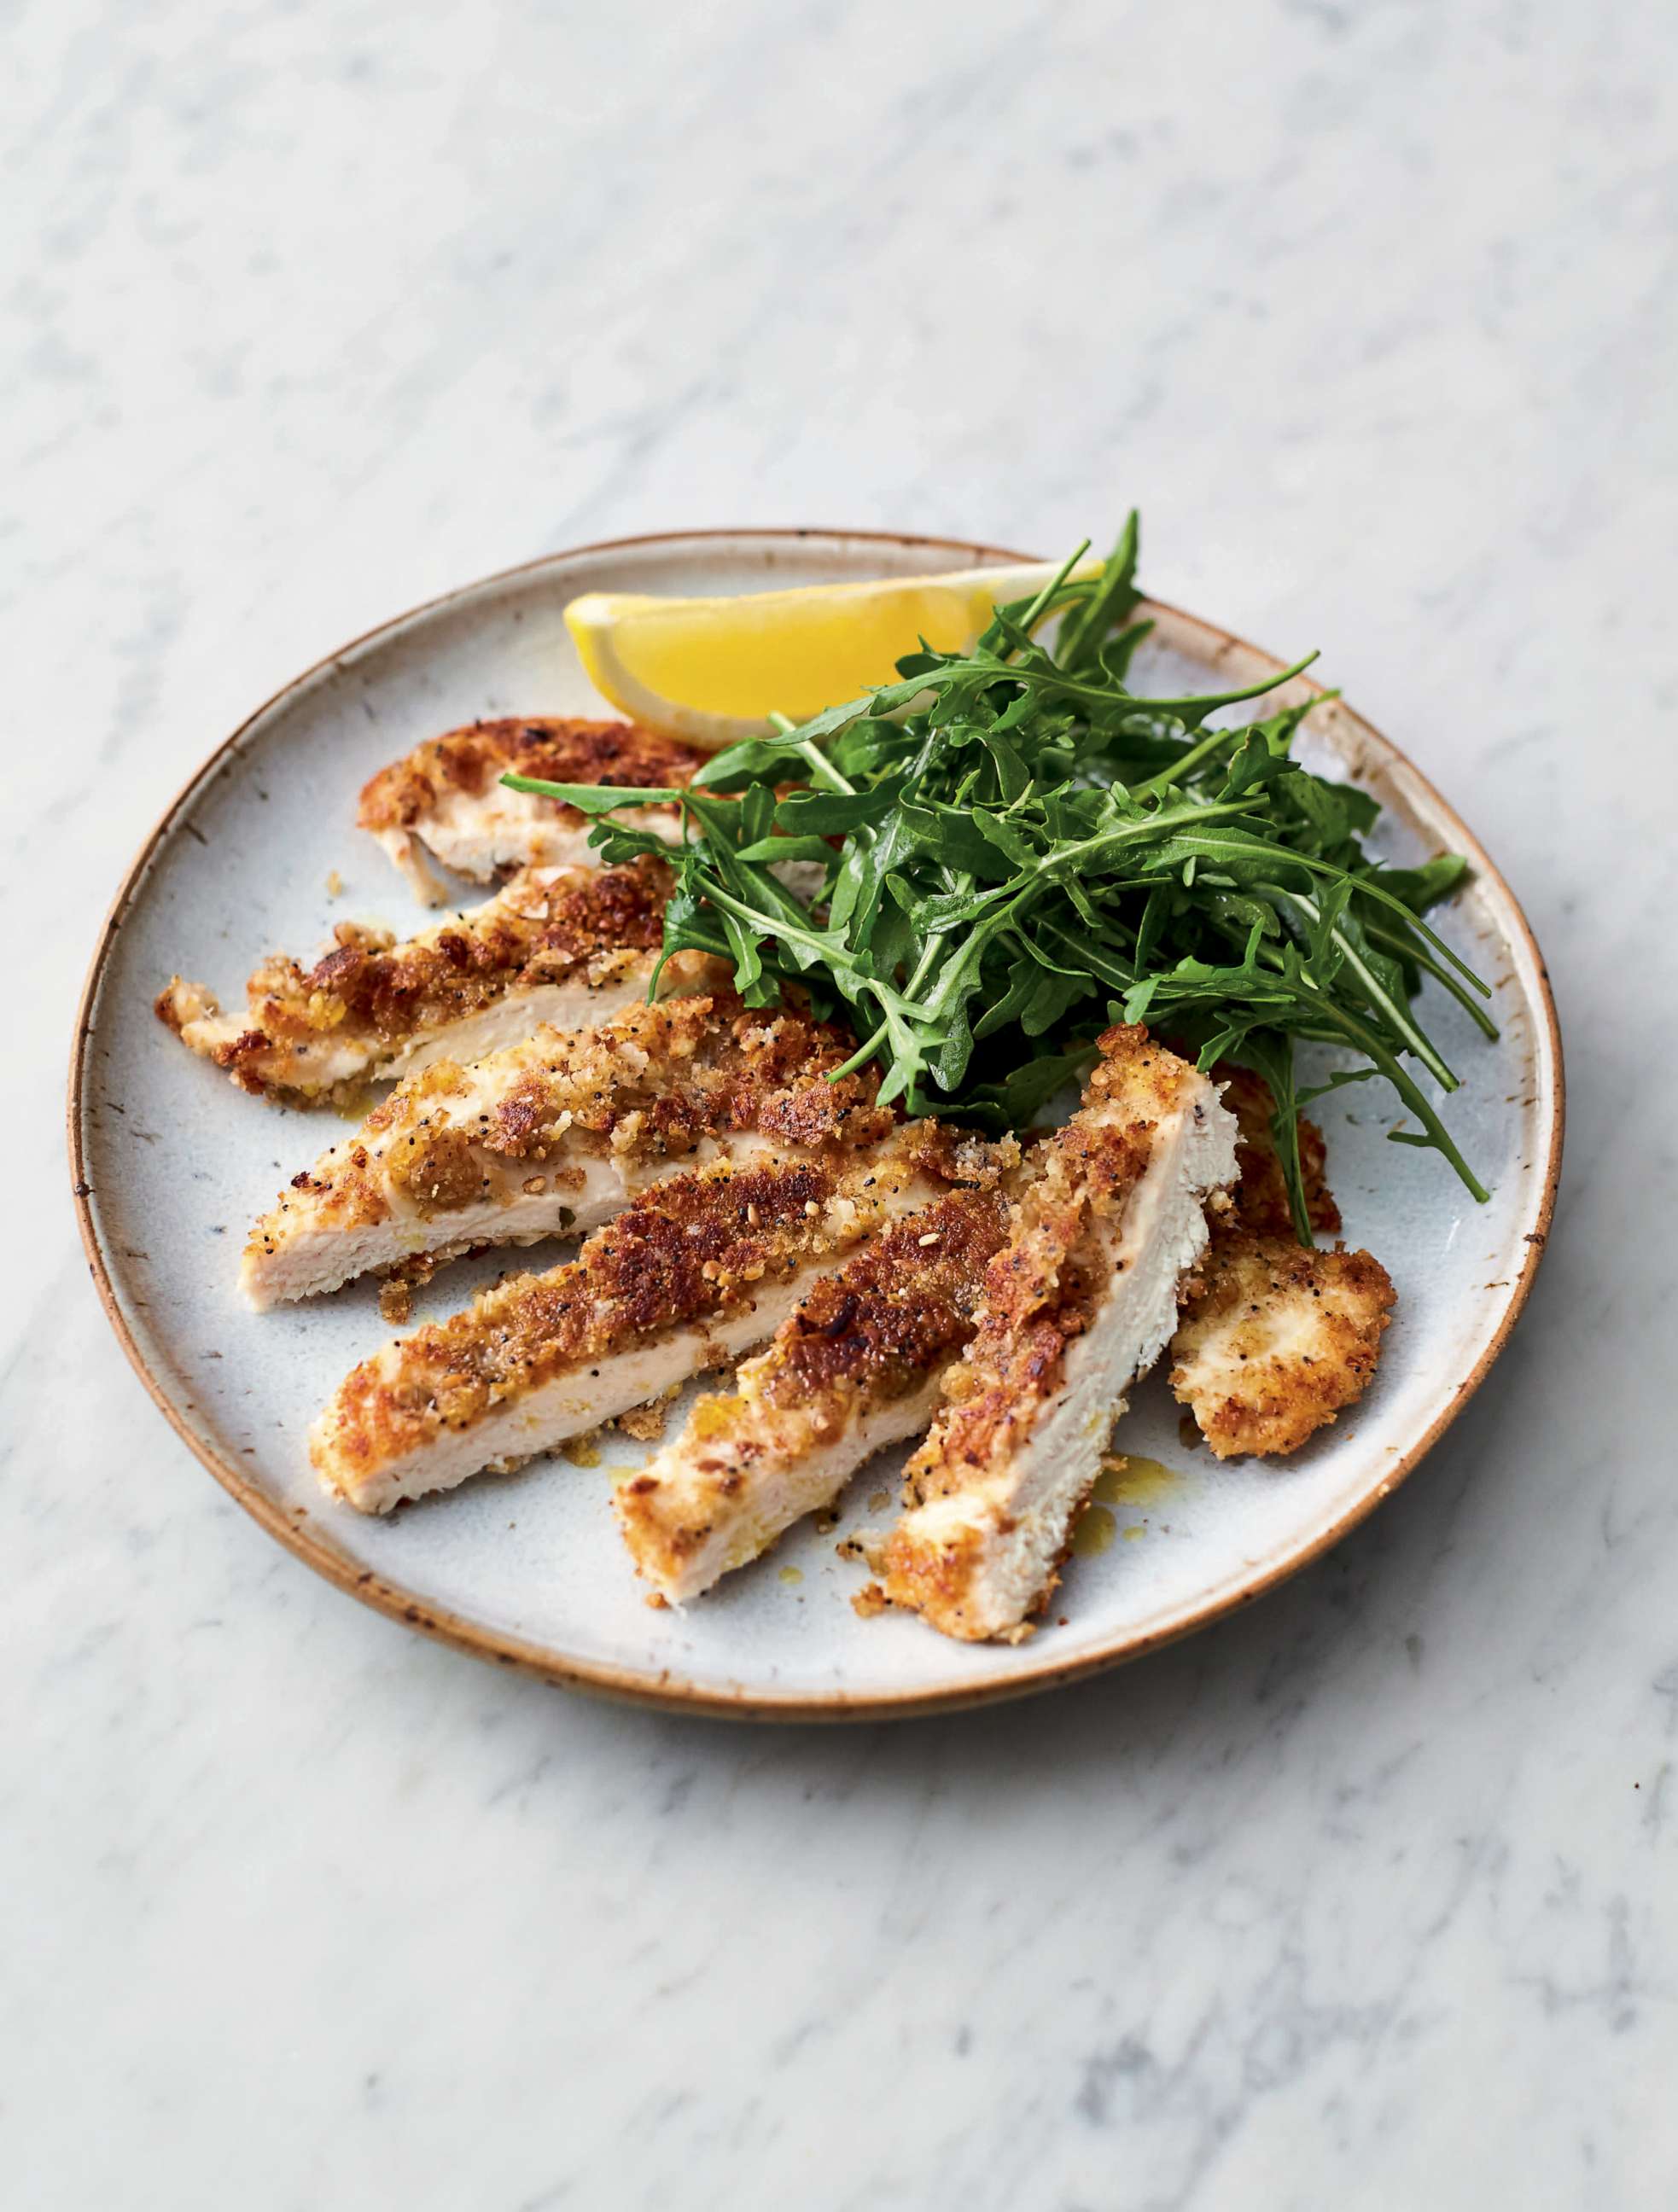 PHOTO: Jamie Oliver's crispy garlicky chicken from his new cookbook "5 Ingredients Quick & Easy Food."